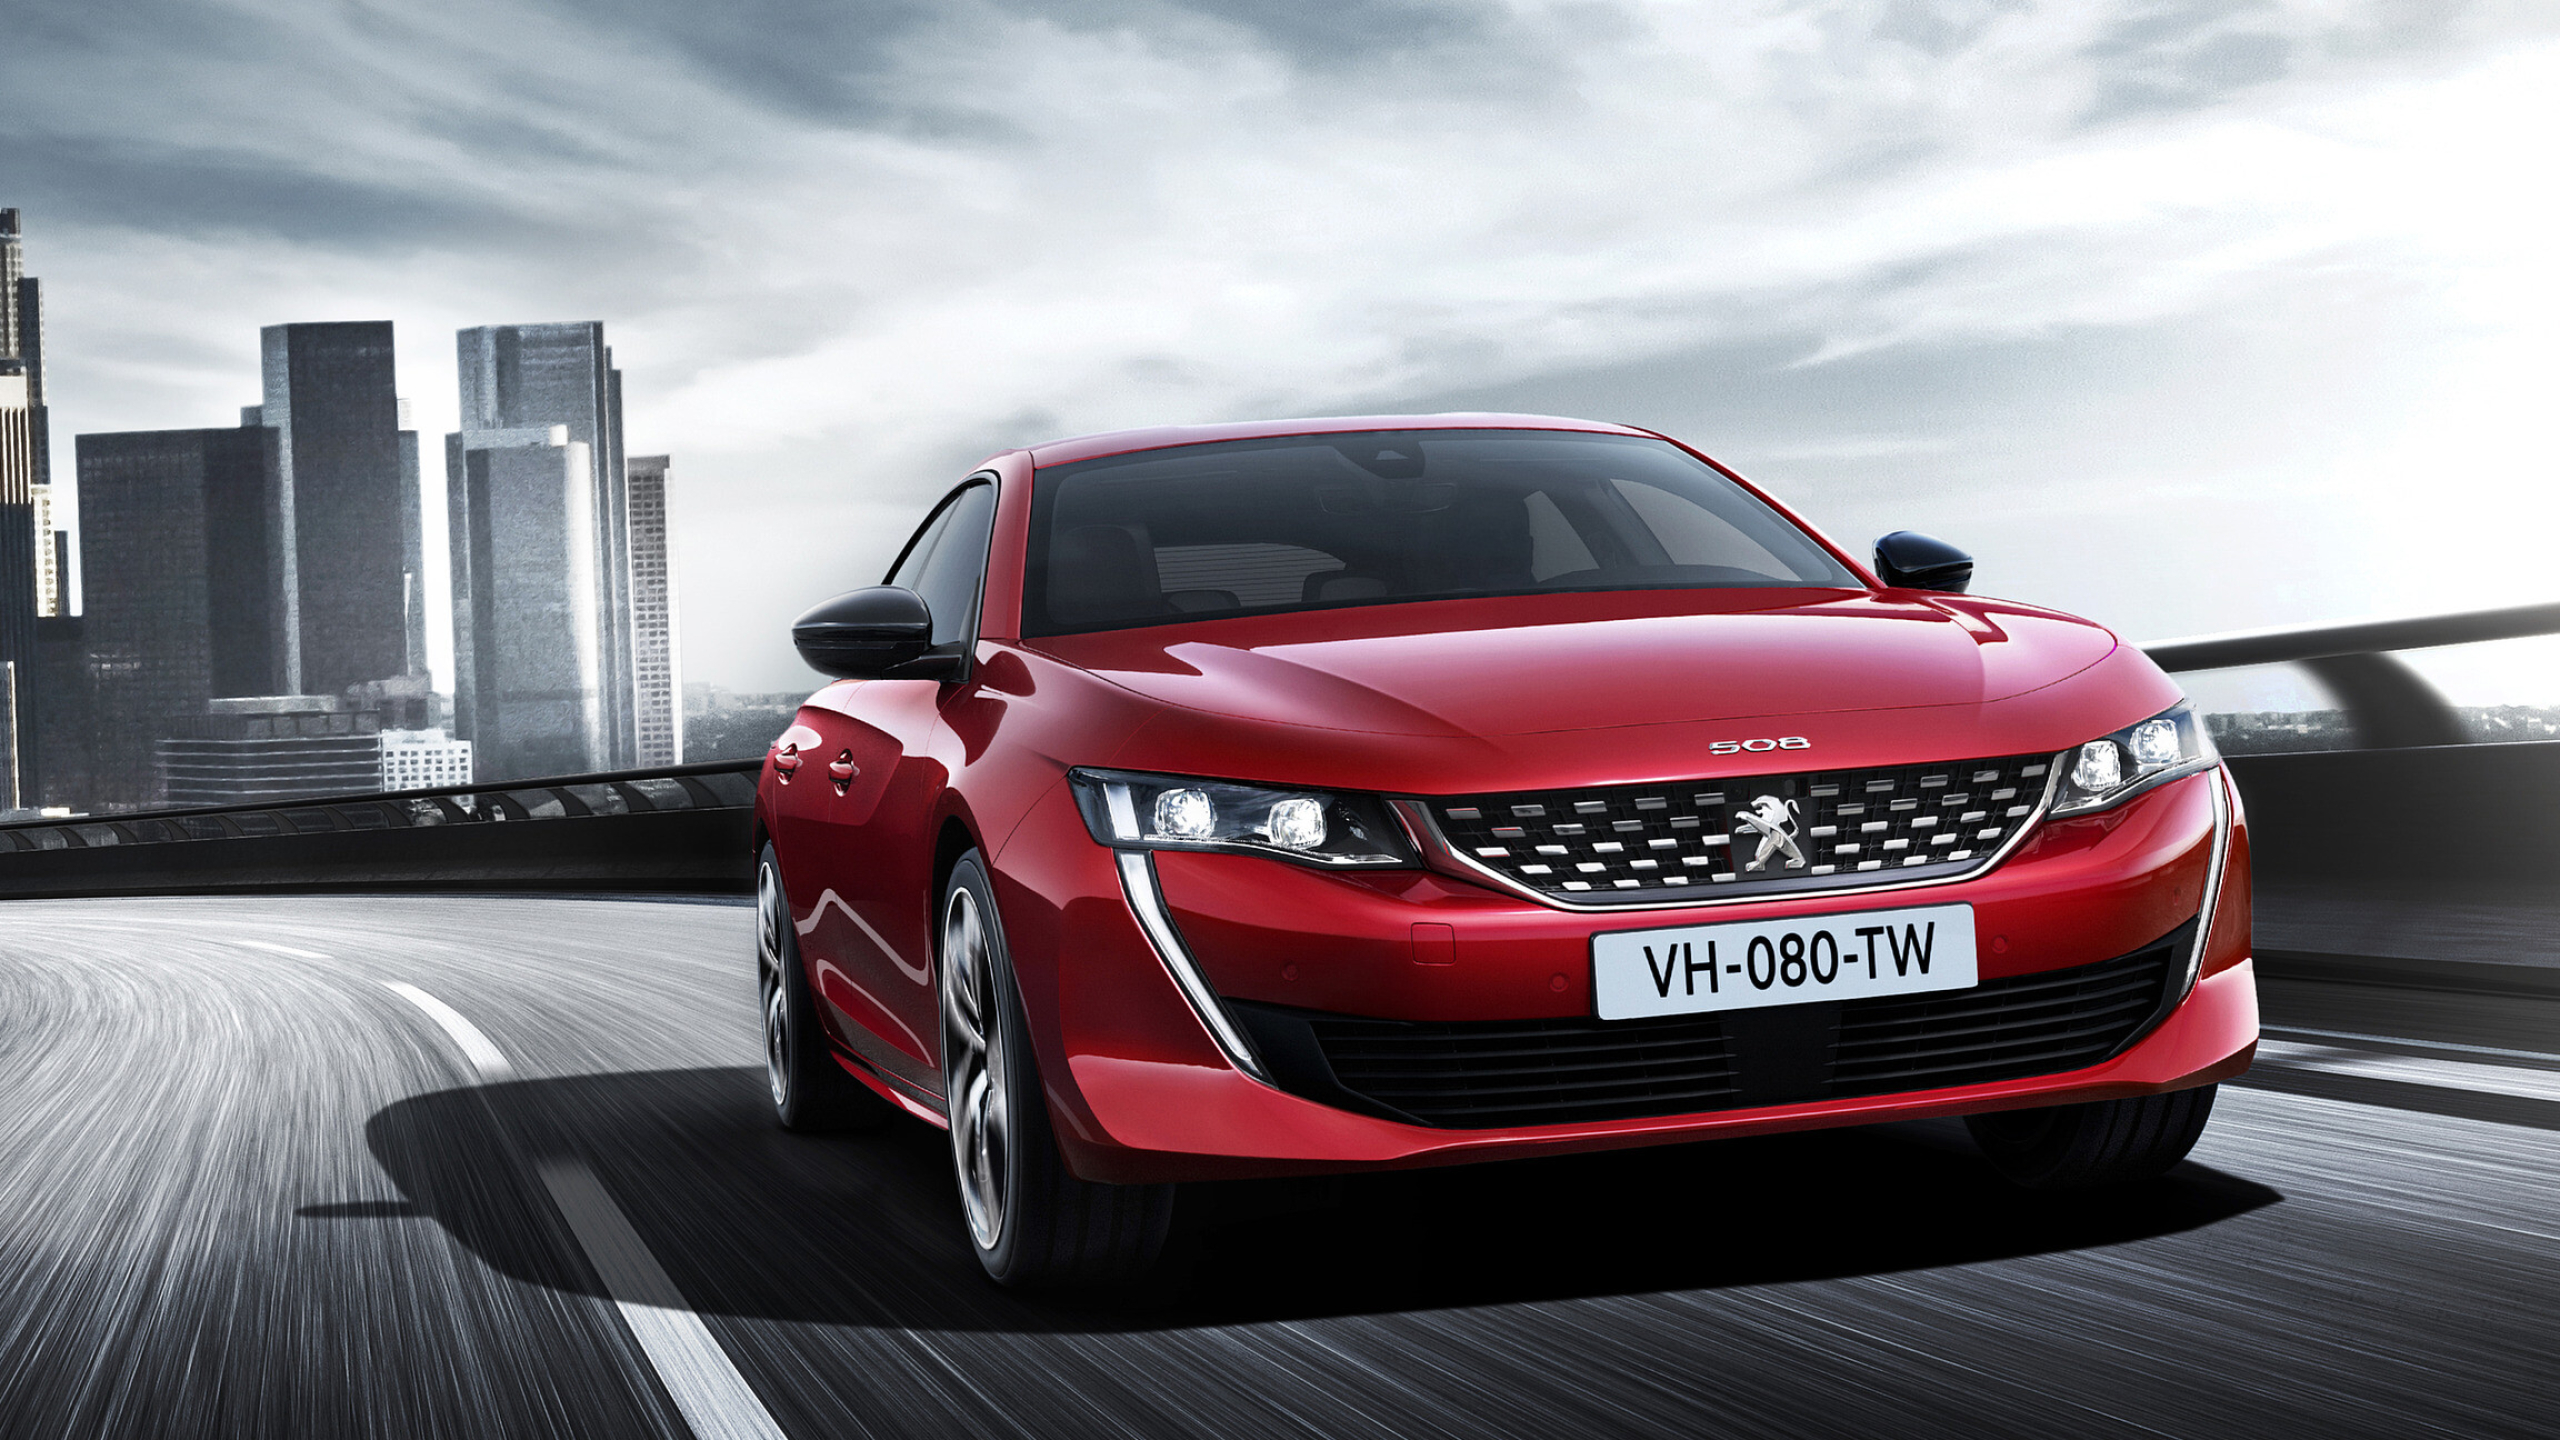 Peugeot: Model 508, Made their first petrol-fuelled internal combustion engine car in 1890. 2560x1440 HD Wallpaper.